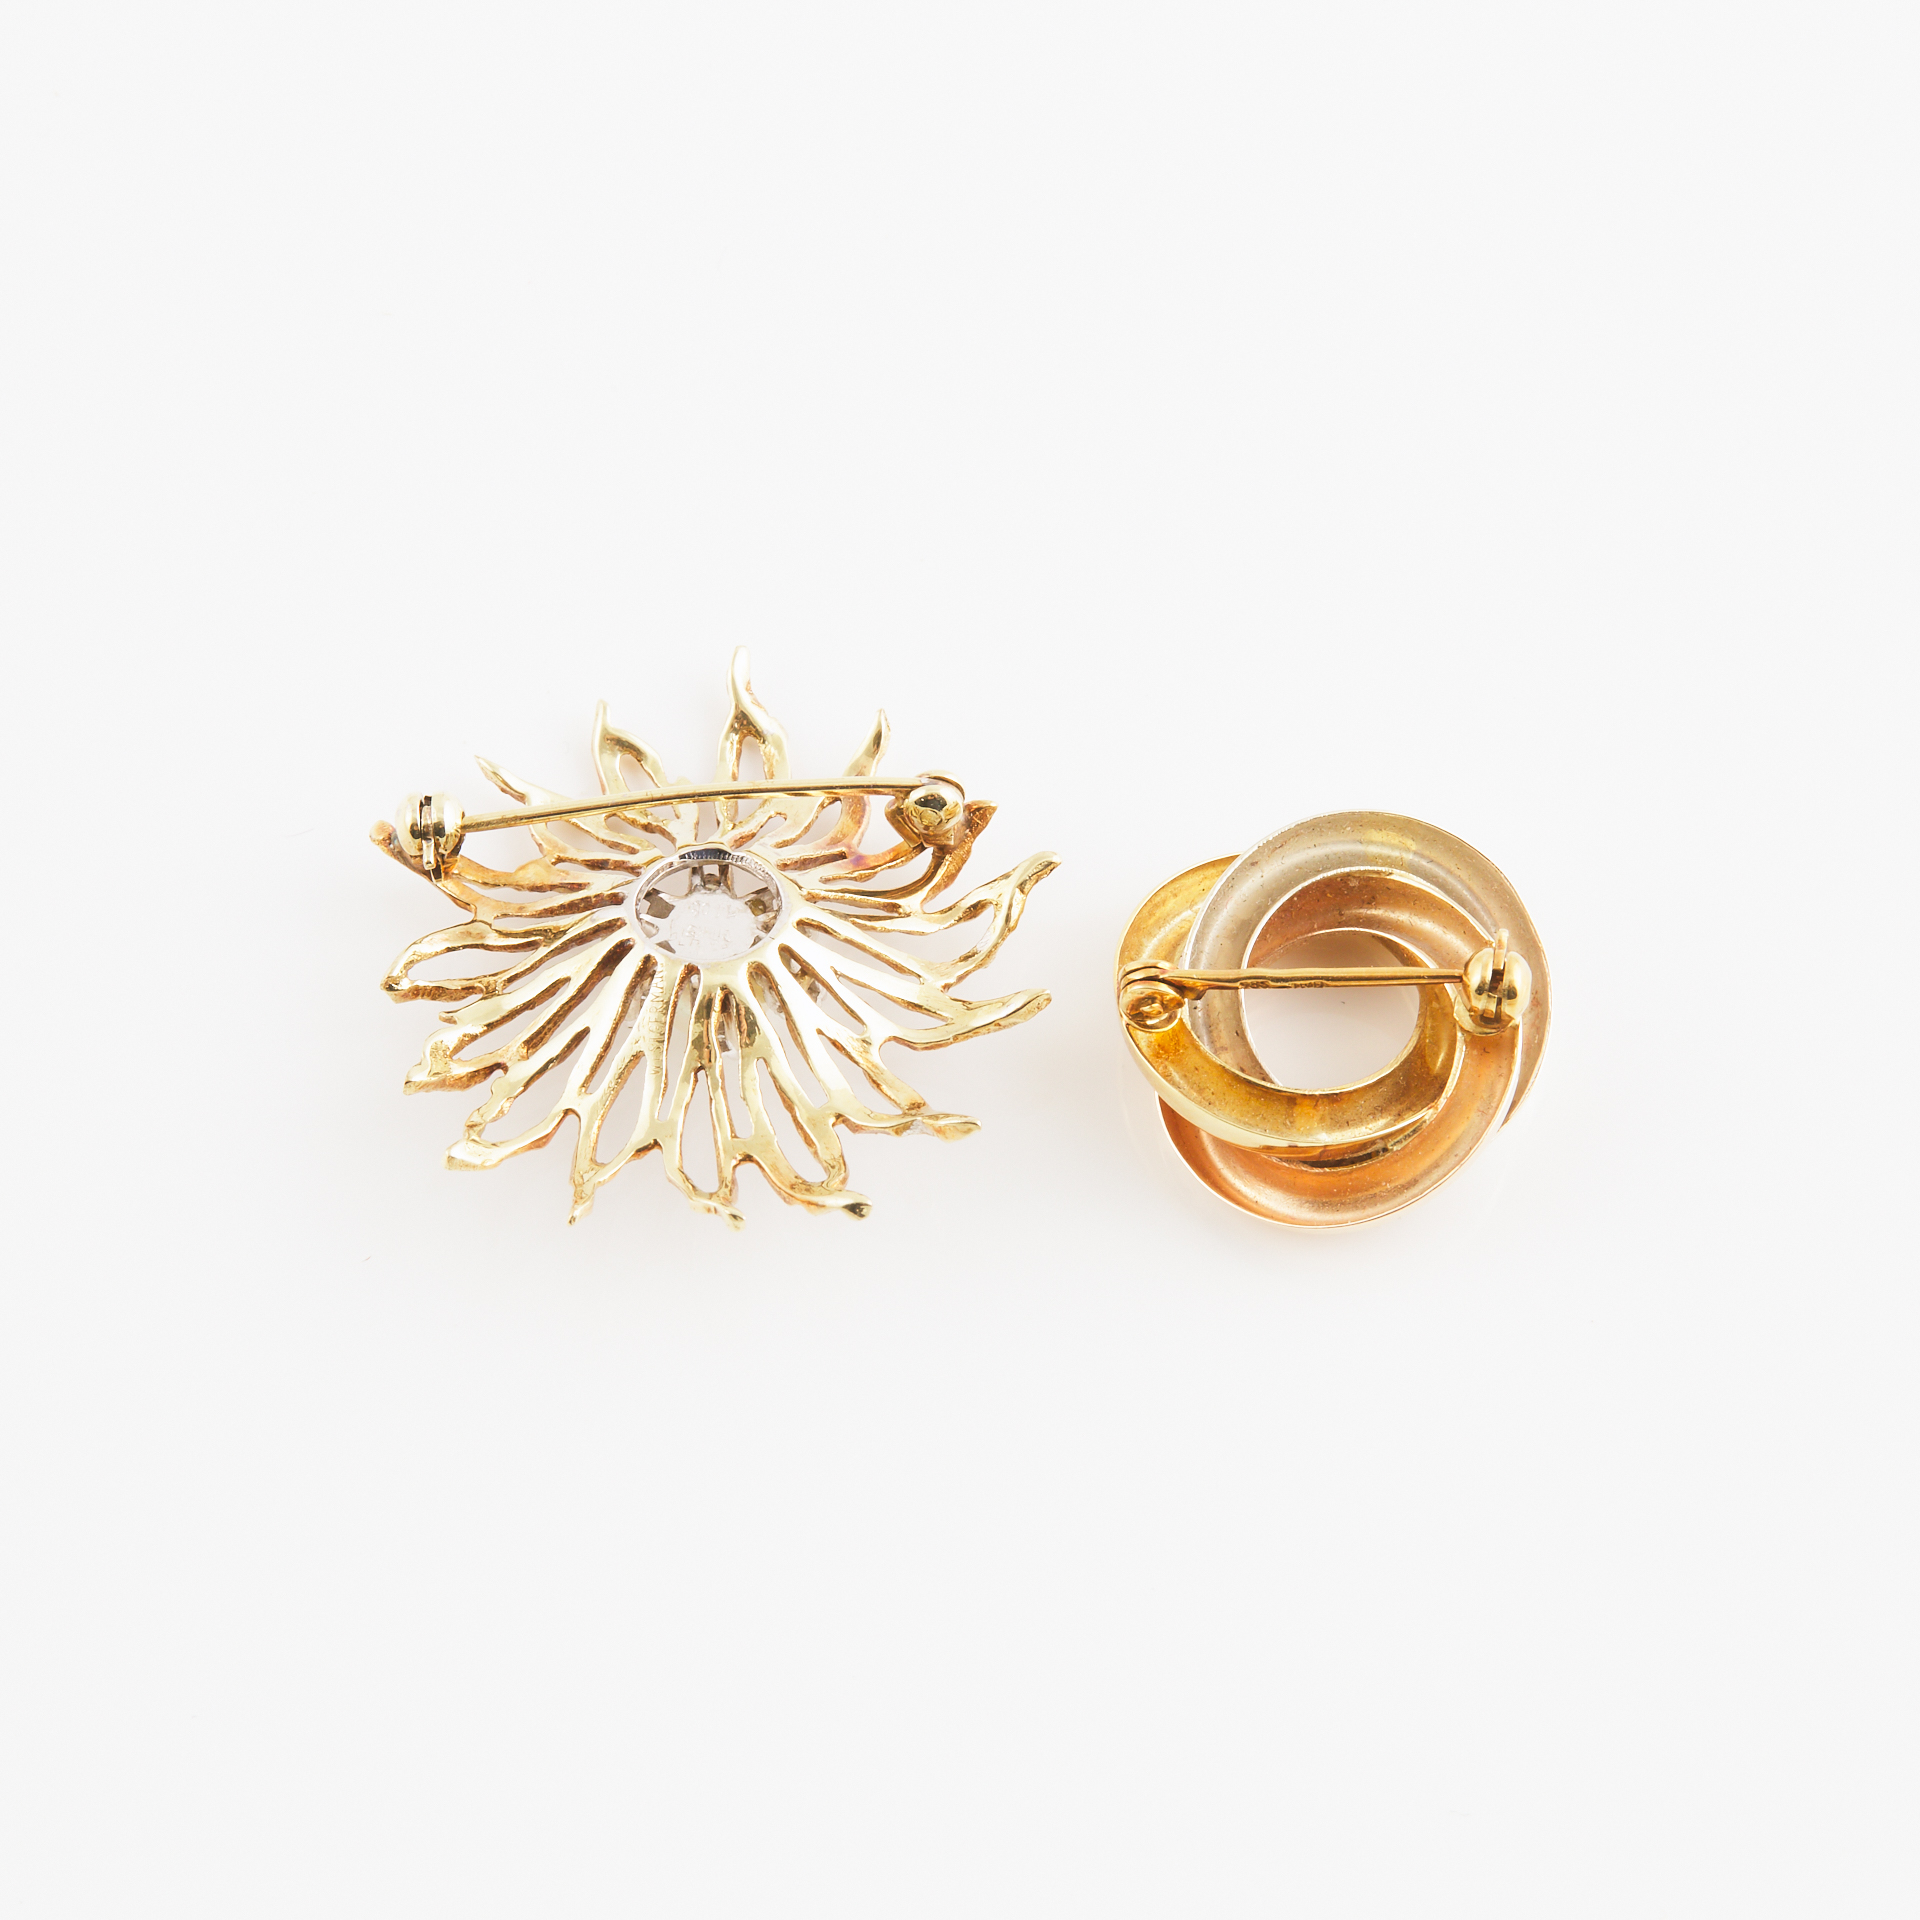 Birks 14k Yellow Gold Brooch And A 14k Tri-Colour Gold Pin